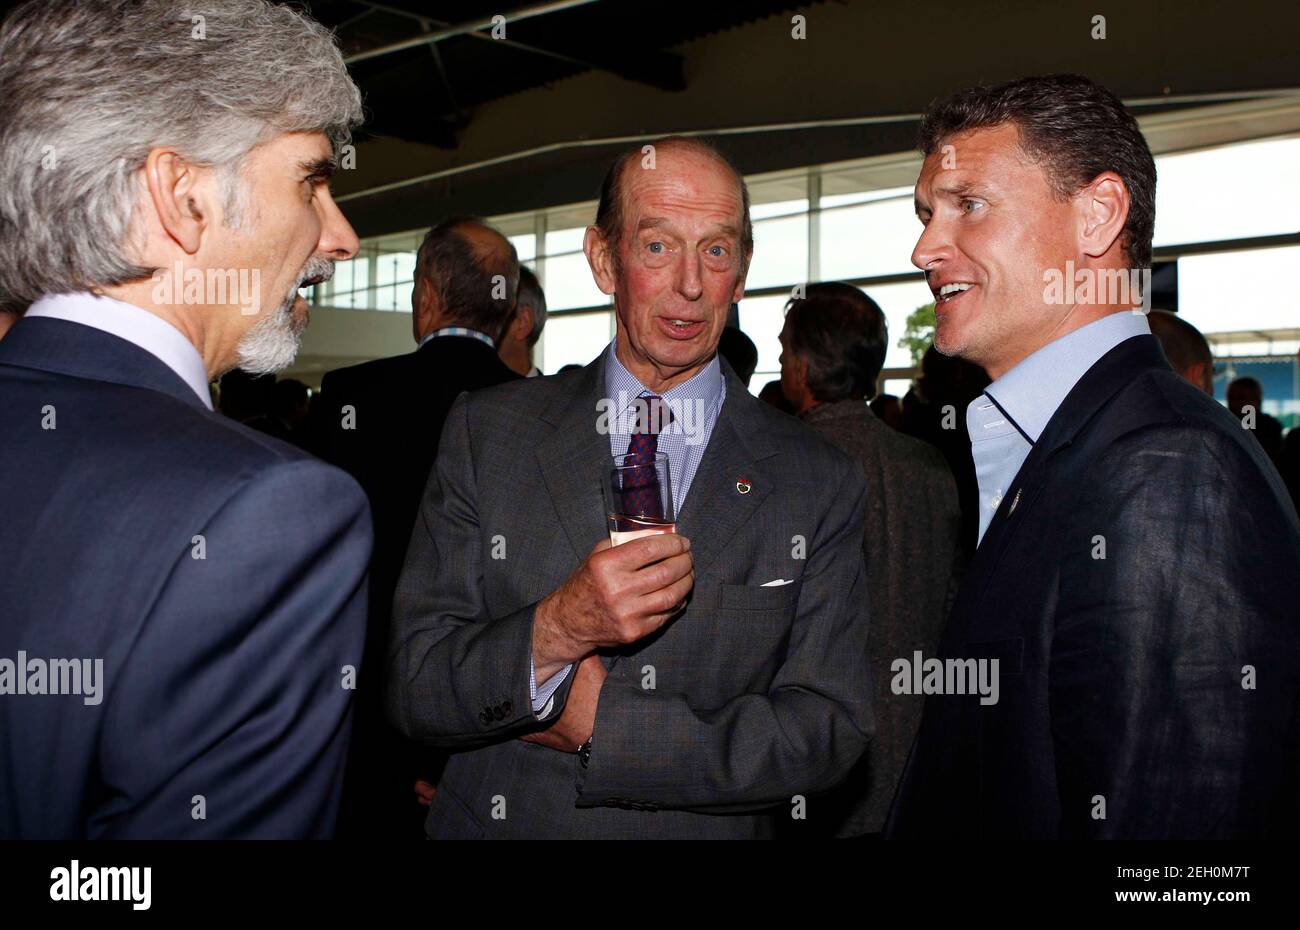 Formula One - F1 - Official launch of The Silverstone Wing  - The Silverstone Wing, Silverstone Circuit, Northamptonshire, NN12 8TN  - 17/5/11  HRH Duke of Kent (C) and Former Formula One Drivers Damon Hill (L) and David Coulthard before the opening ceremony  Mandatory Credit: Action Images / Peter Cziborra  Livepic Stock Photo